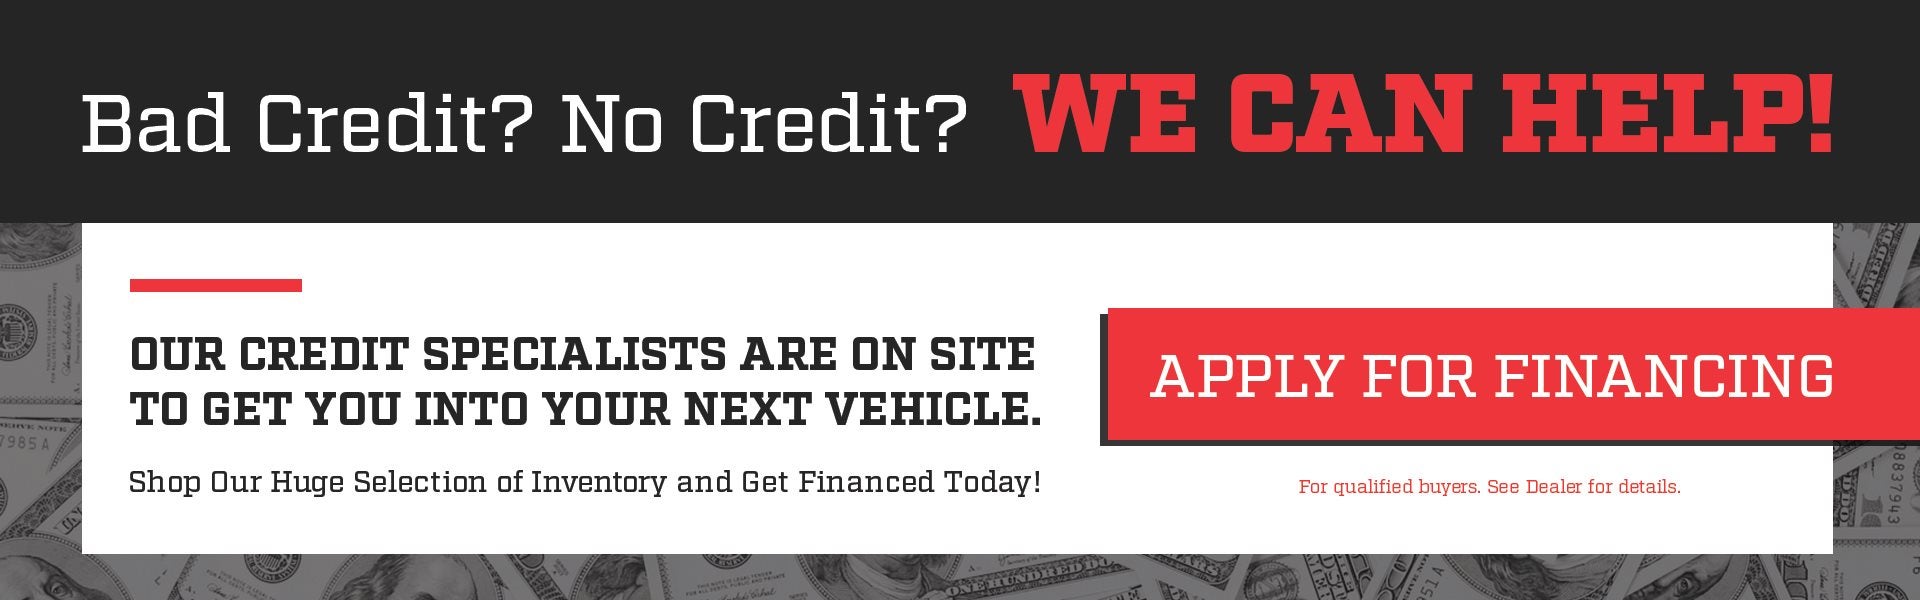 We Can Help With Bad Credit in Eden, NC